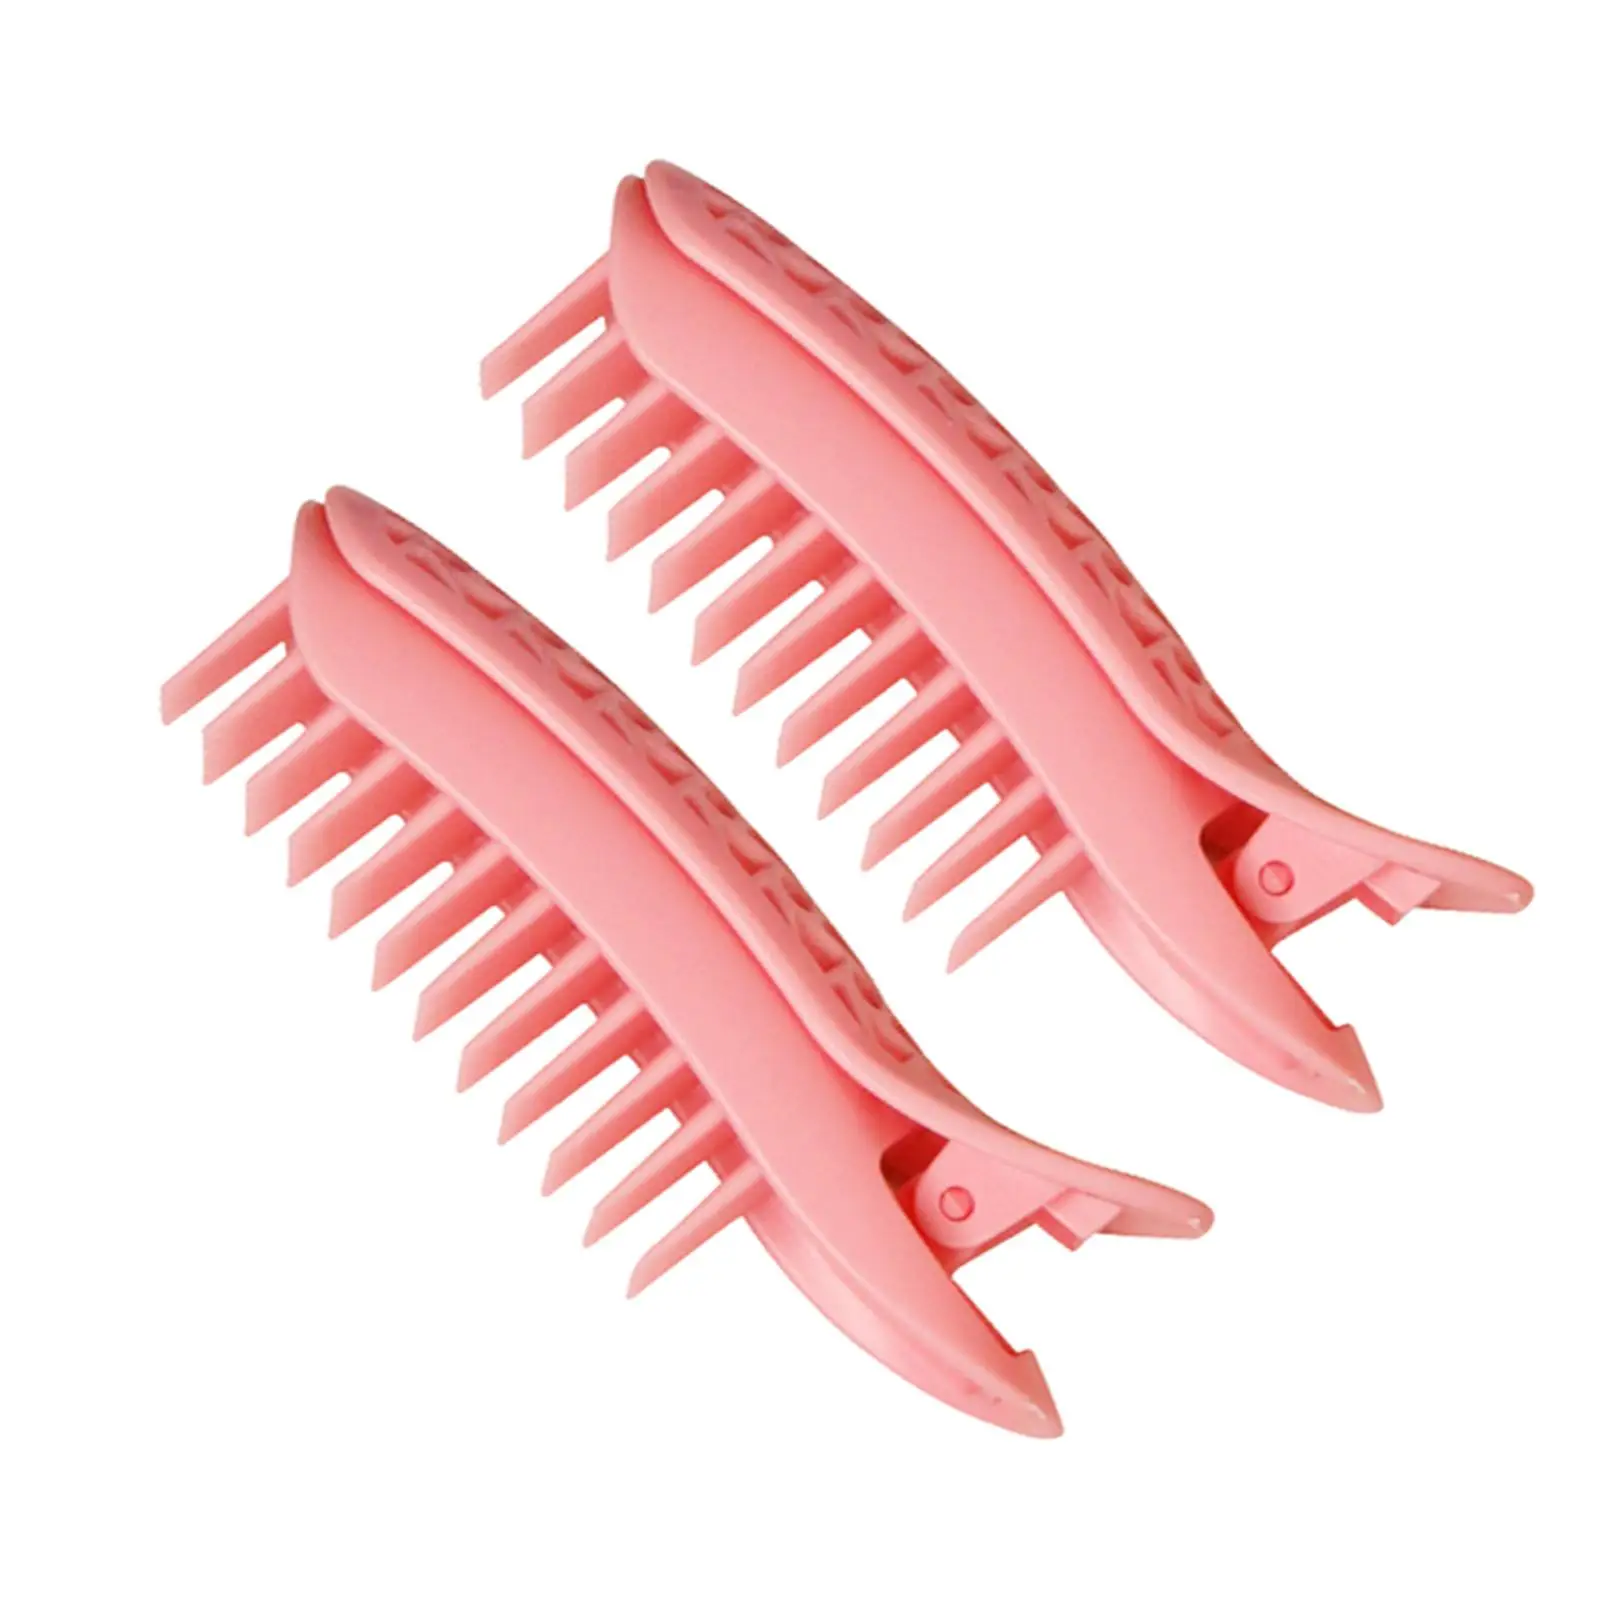 2 Pieces Sleeping Volumizing Hair Roots Clip Lazy Bangs Fixed Clips Shaping Durable Shaggy Curling Clamps for Long Short Hair